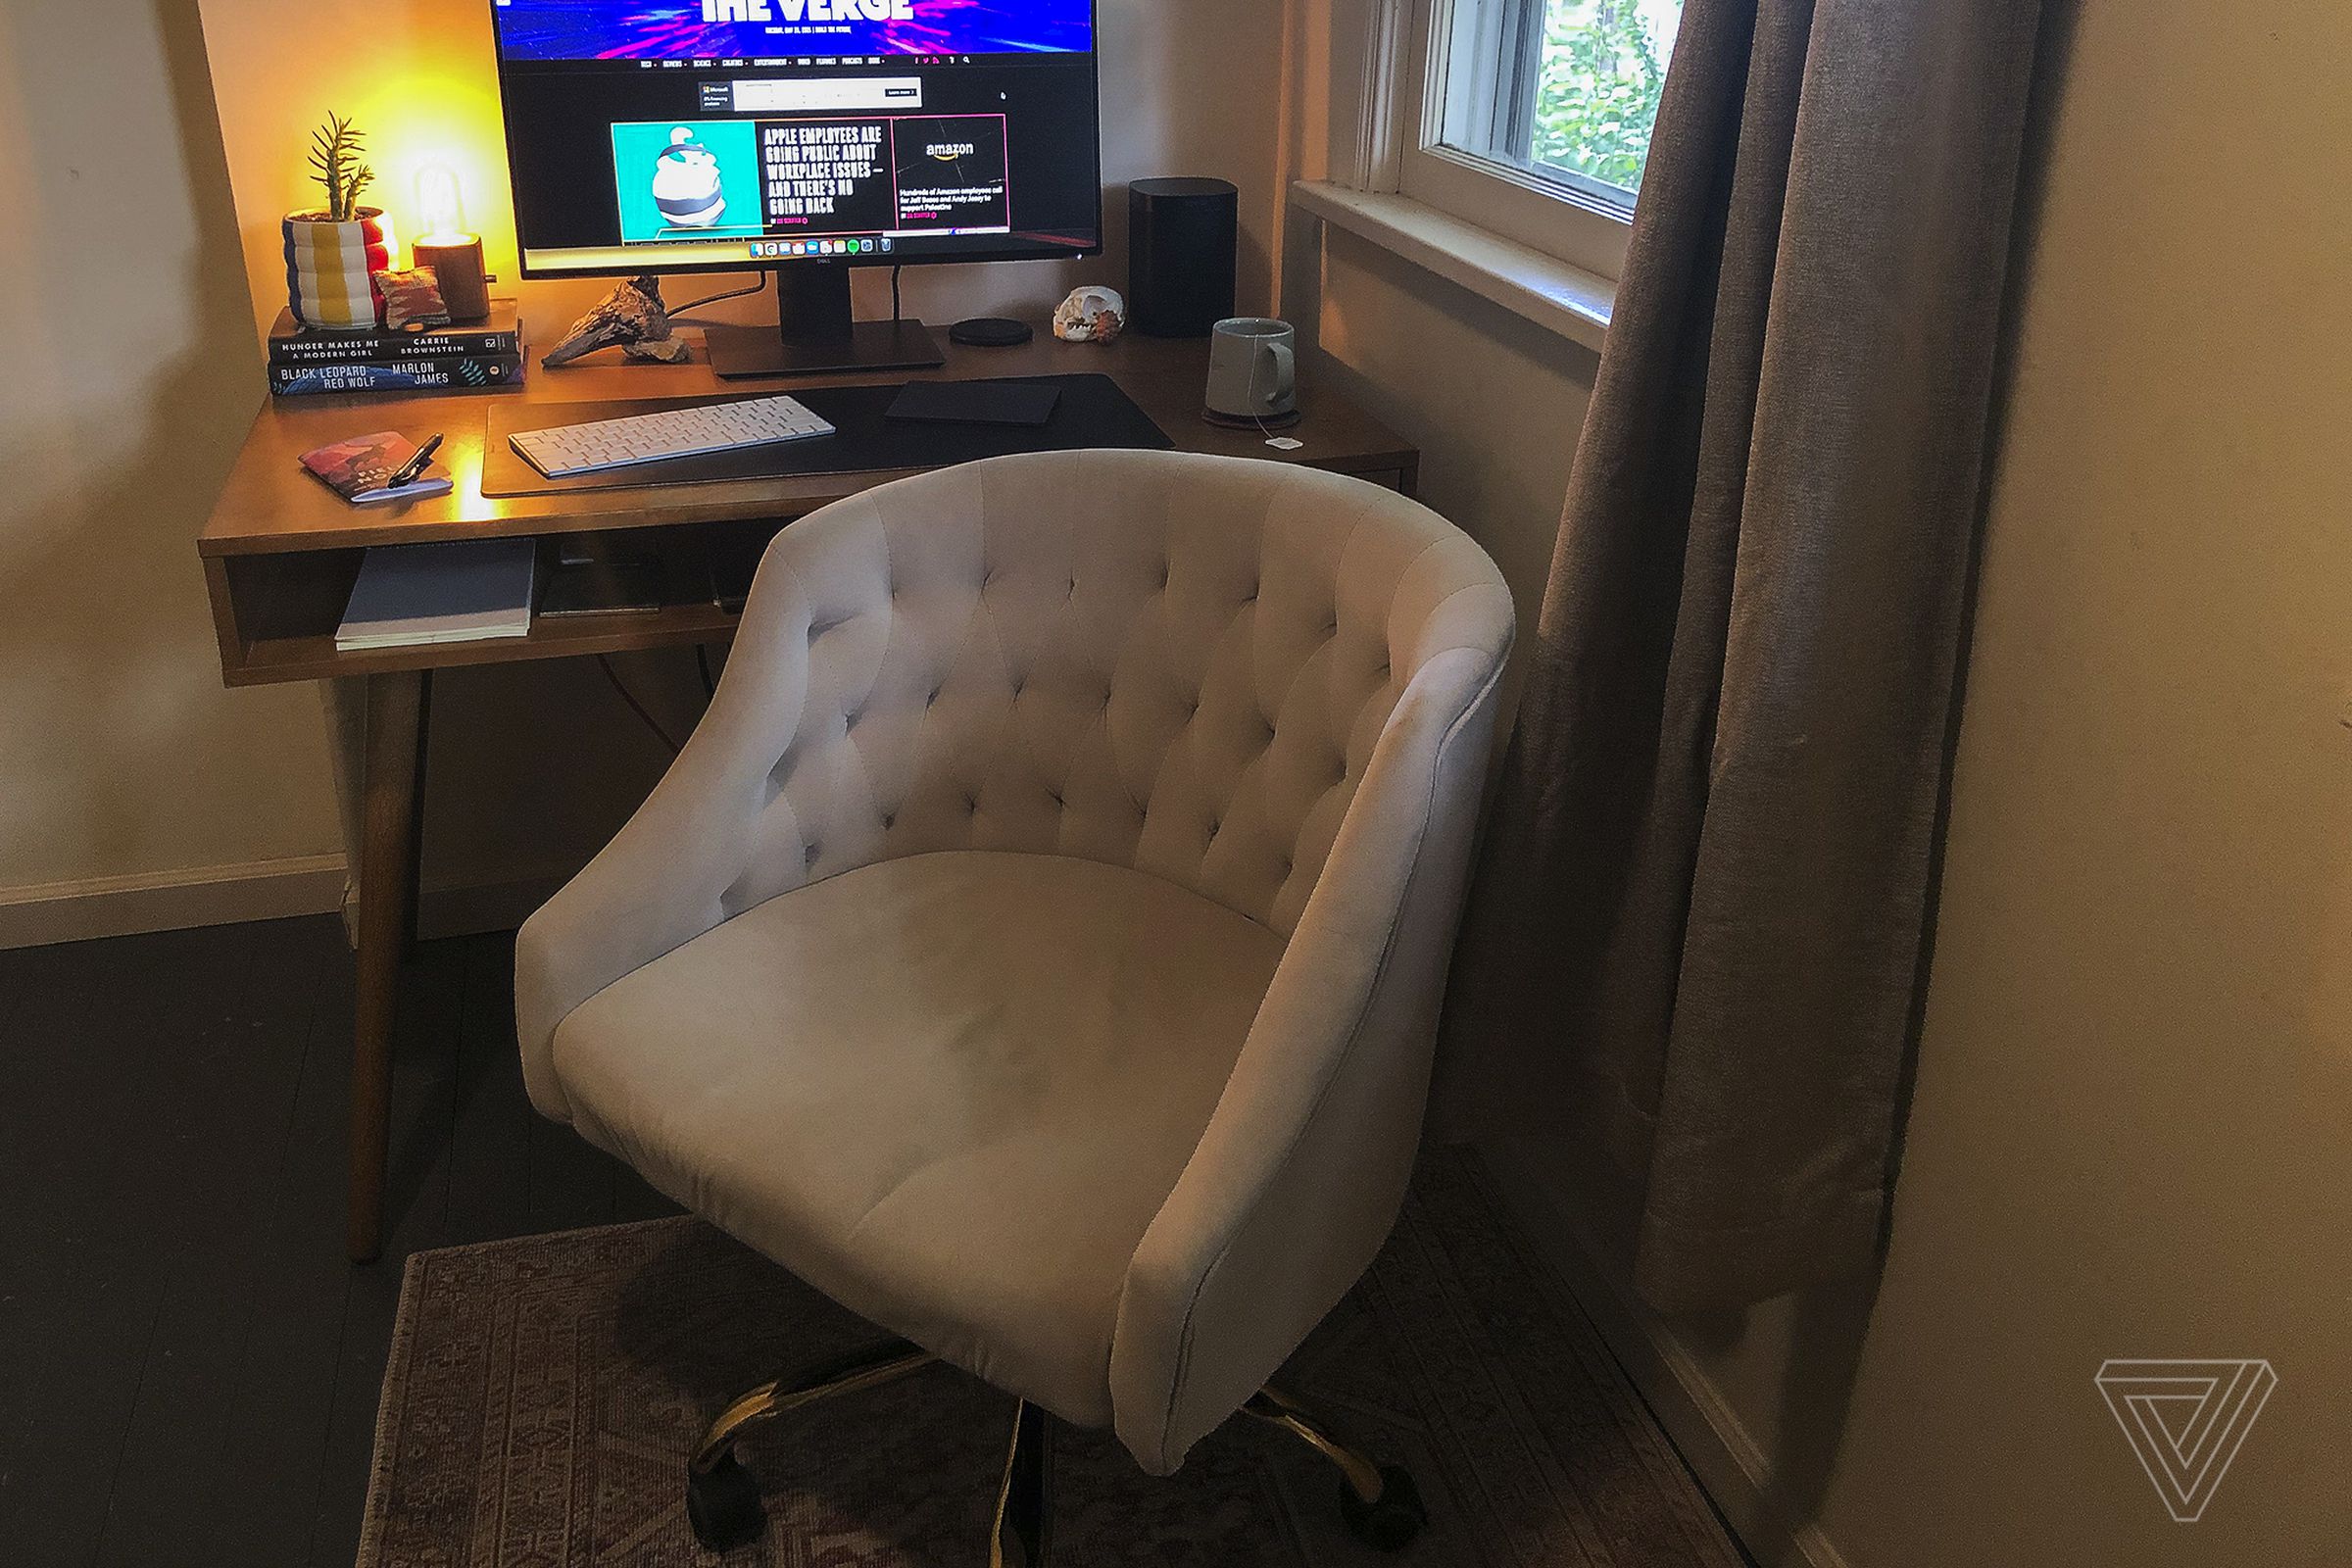 The Louise Desk Chair came with the territory